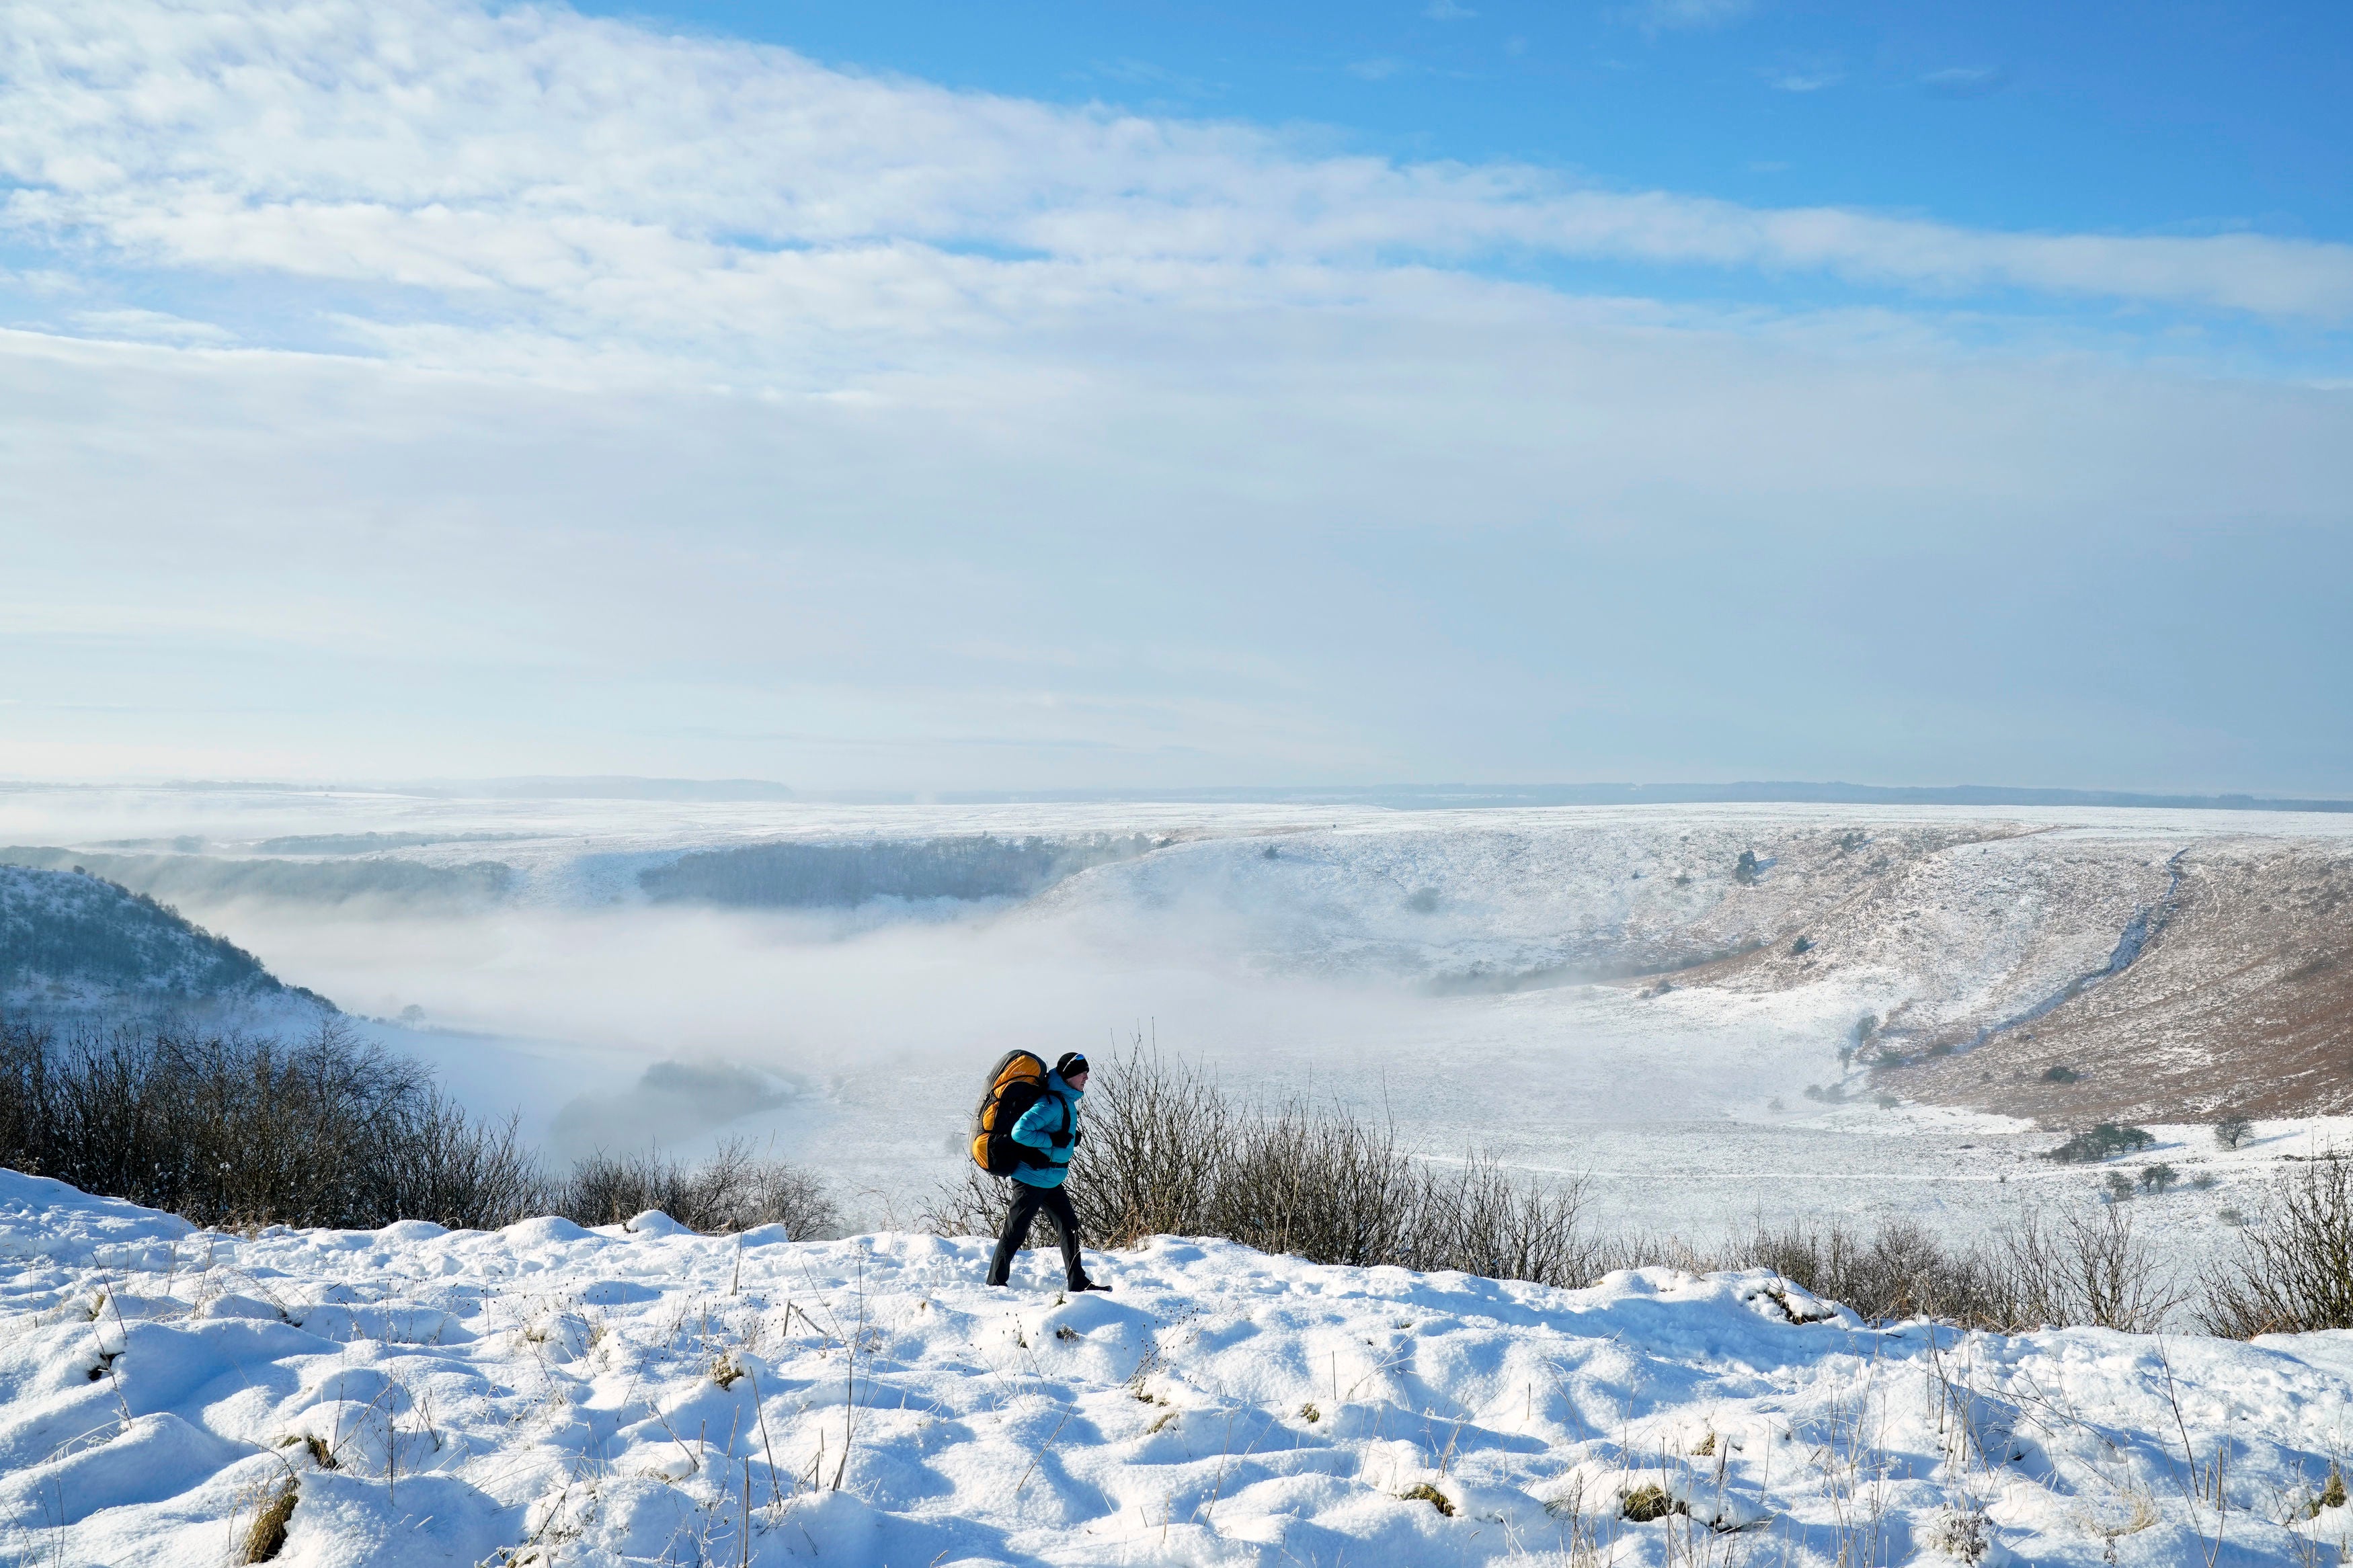 Walking through snow above the Hole of Horcum at the North York Moors National Park